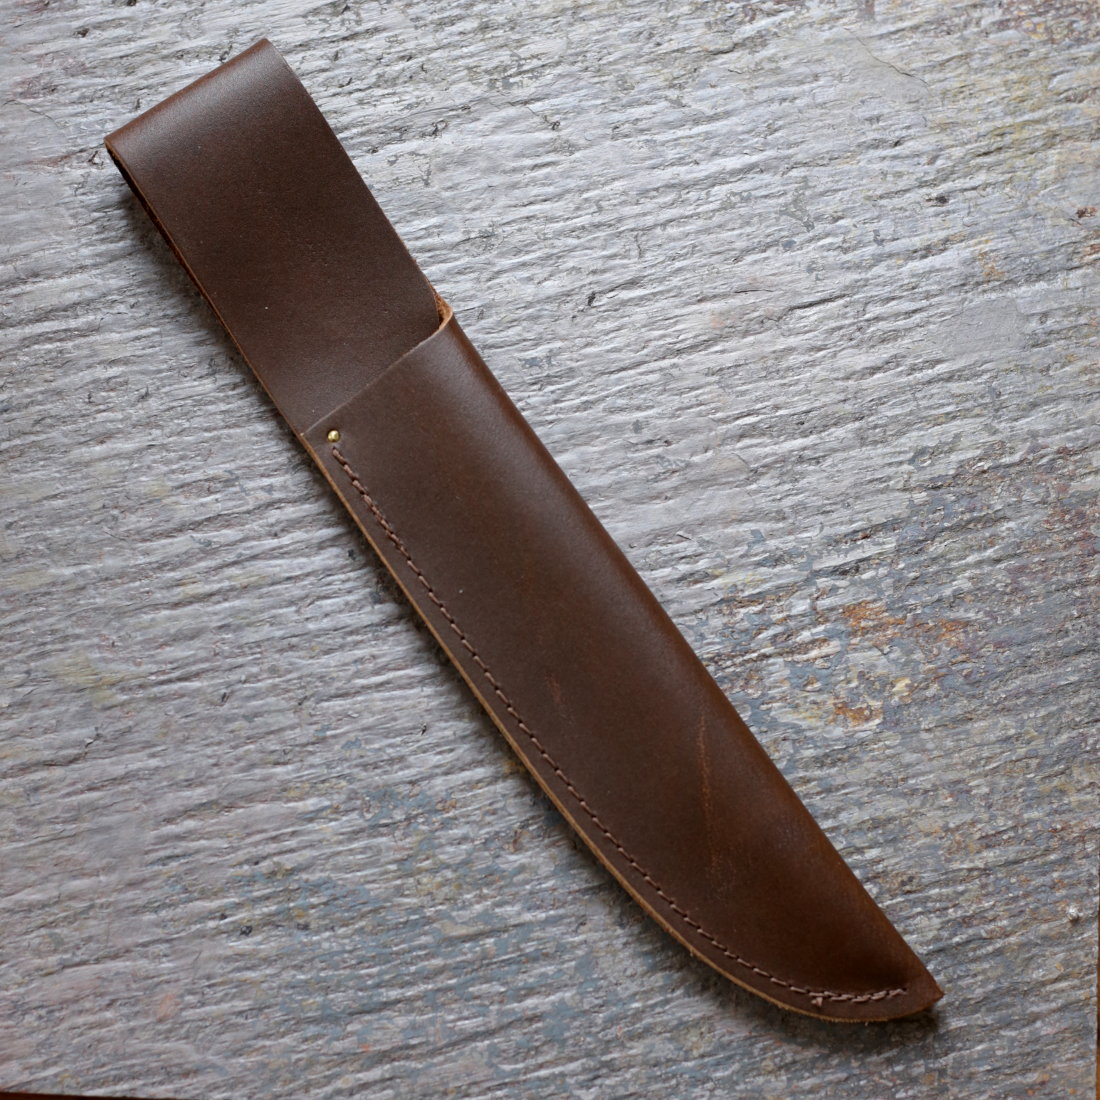 Sheath for Paring/Patch Knife – Townsends